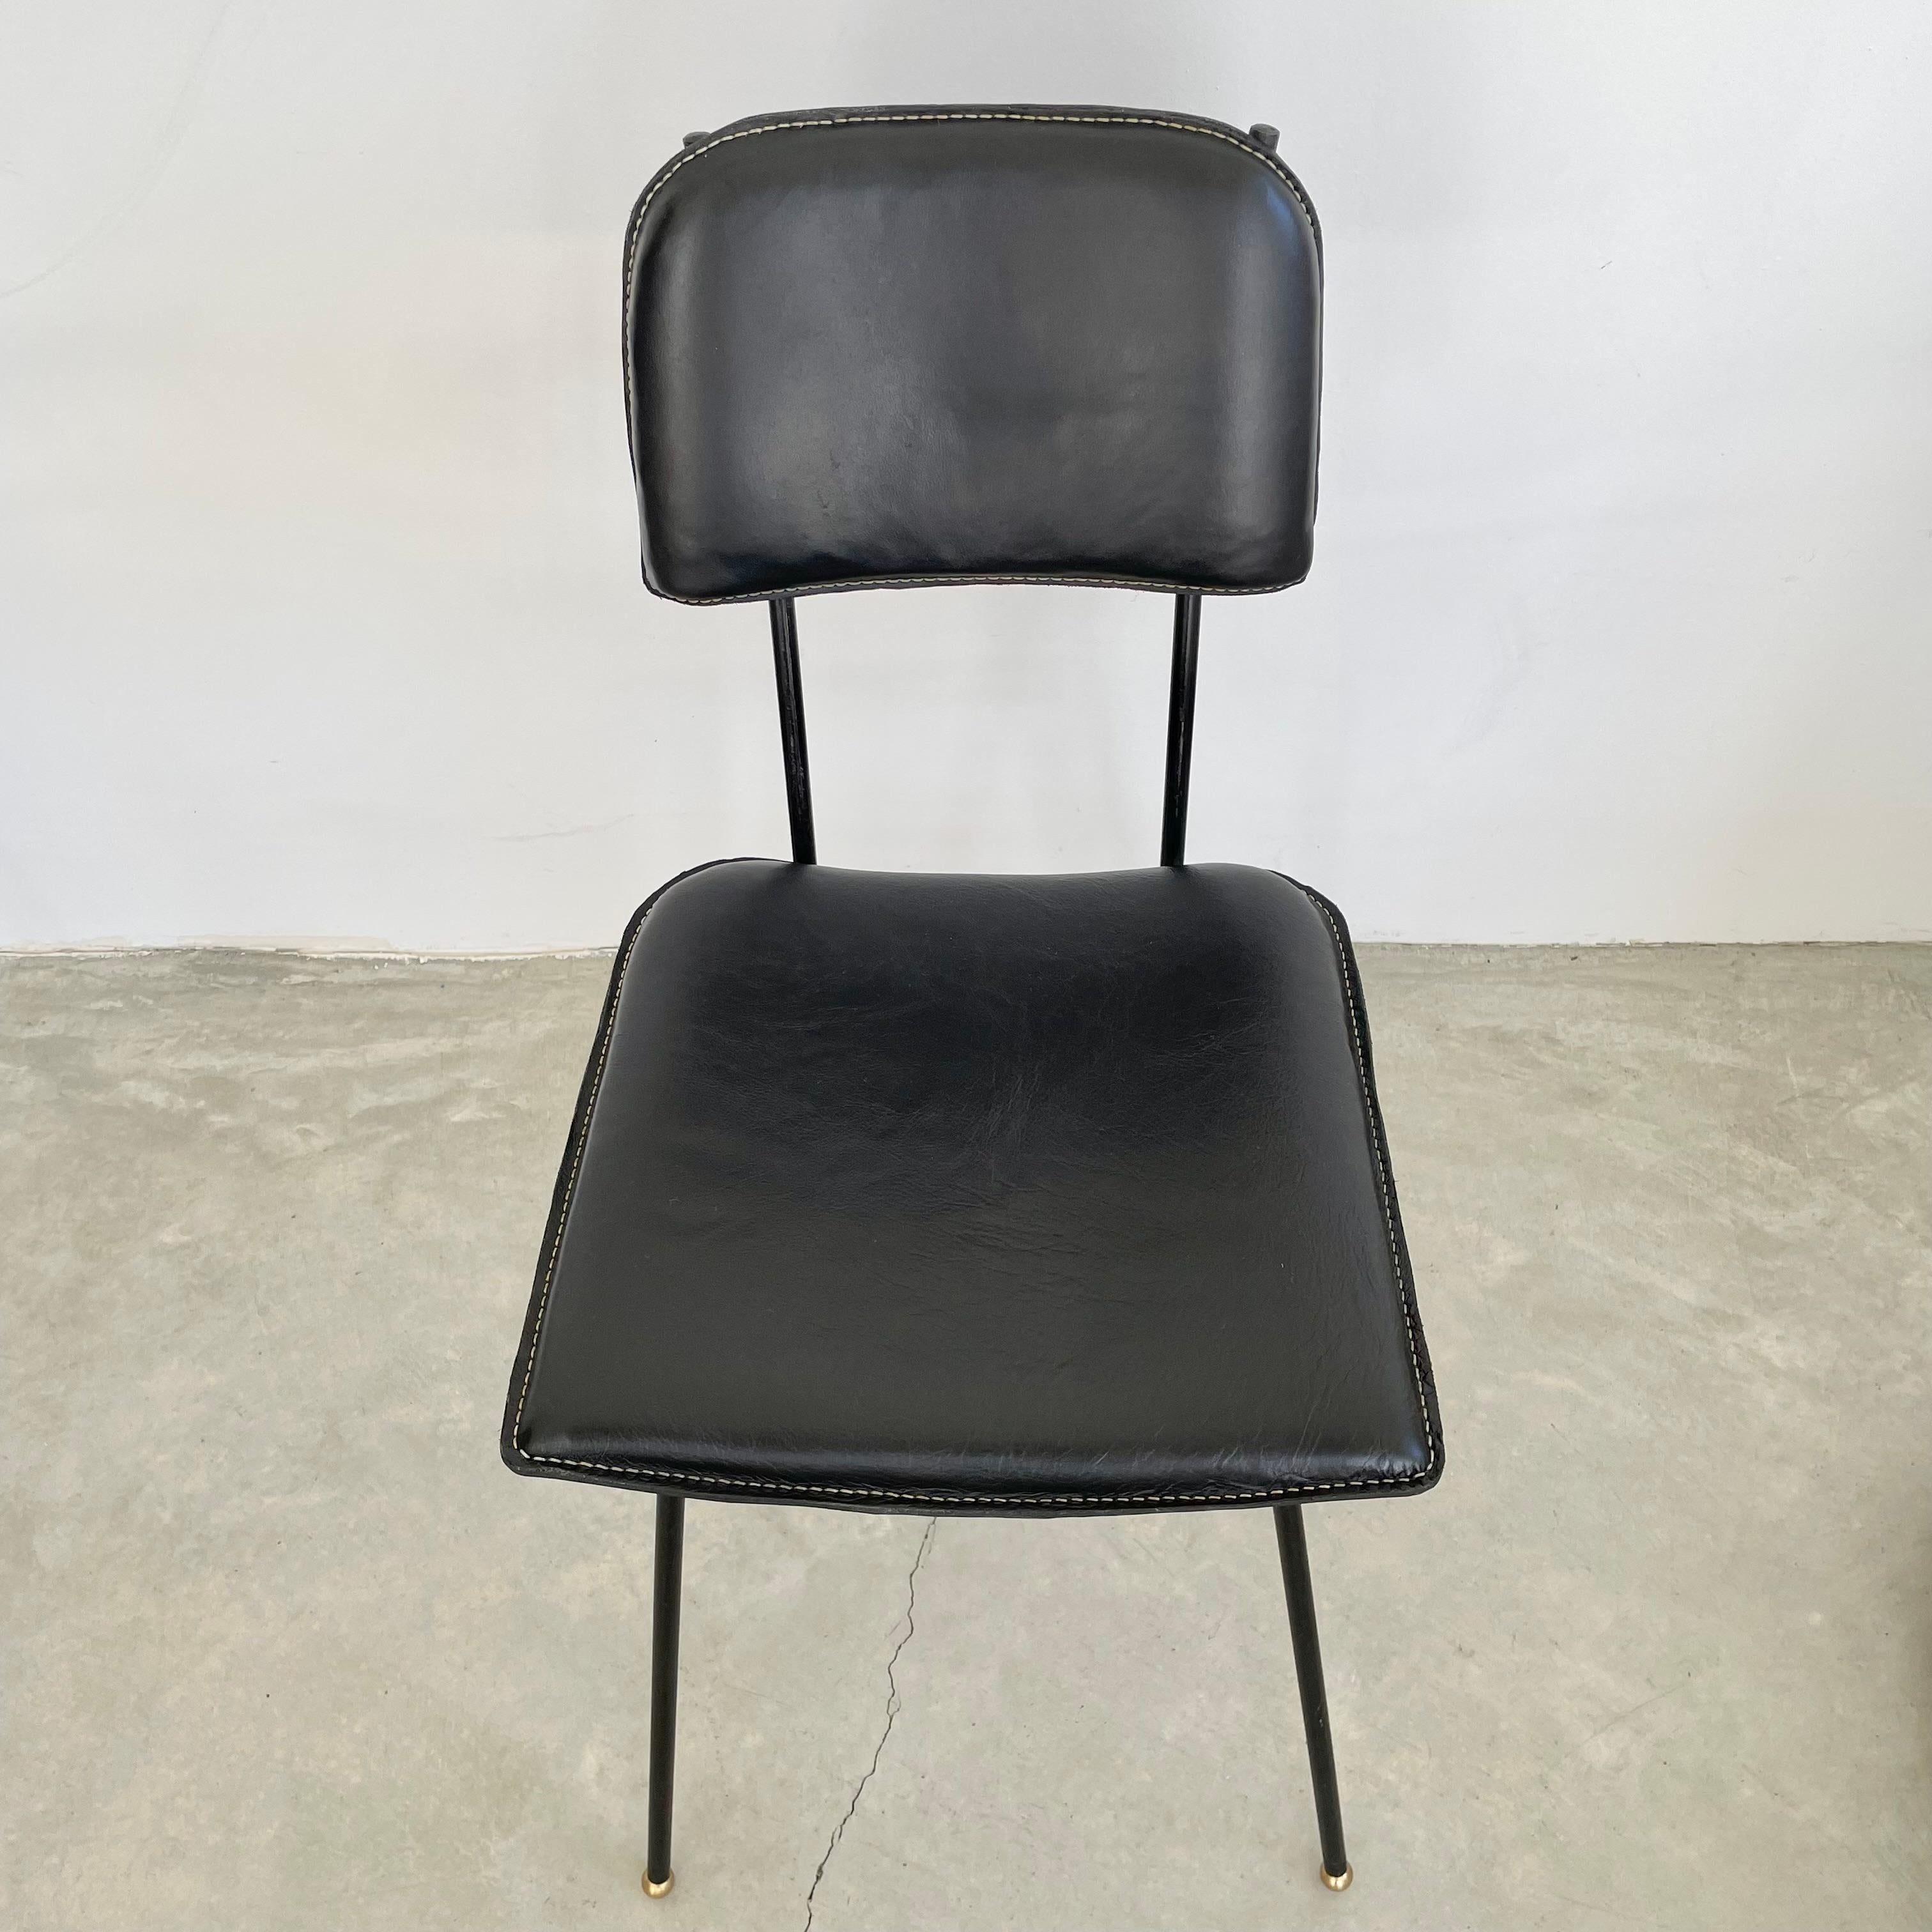 French Jacques Adnet Black Leather Chair, 1950s France For Sale